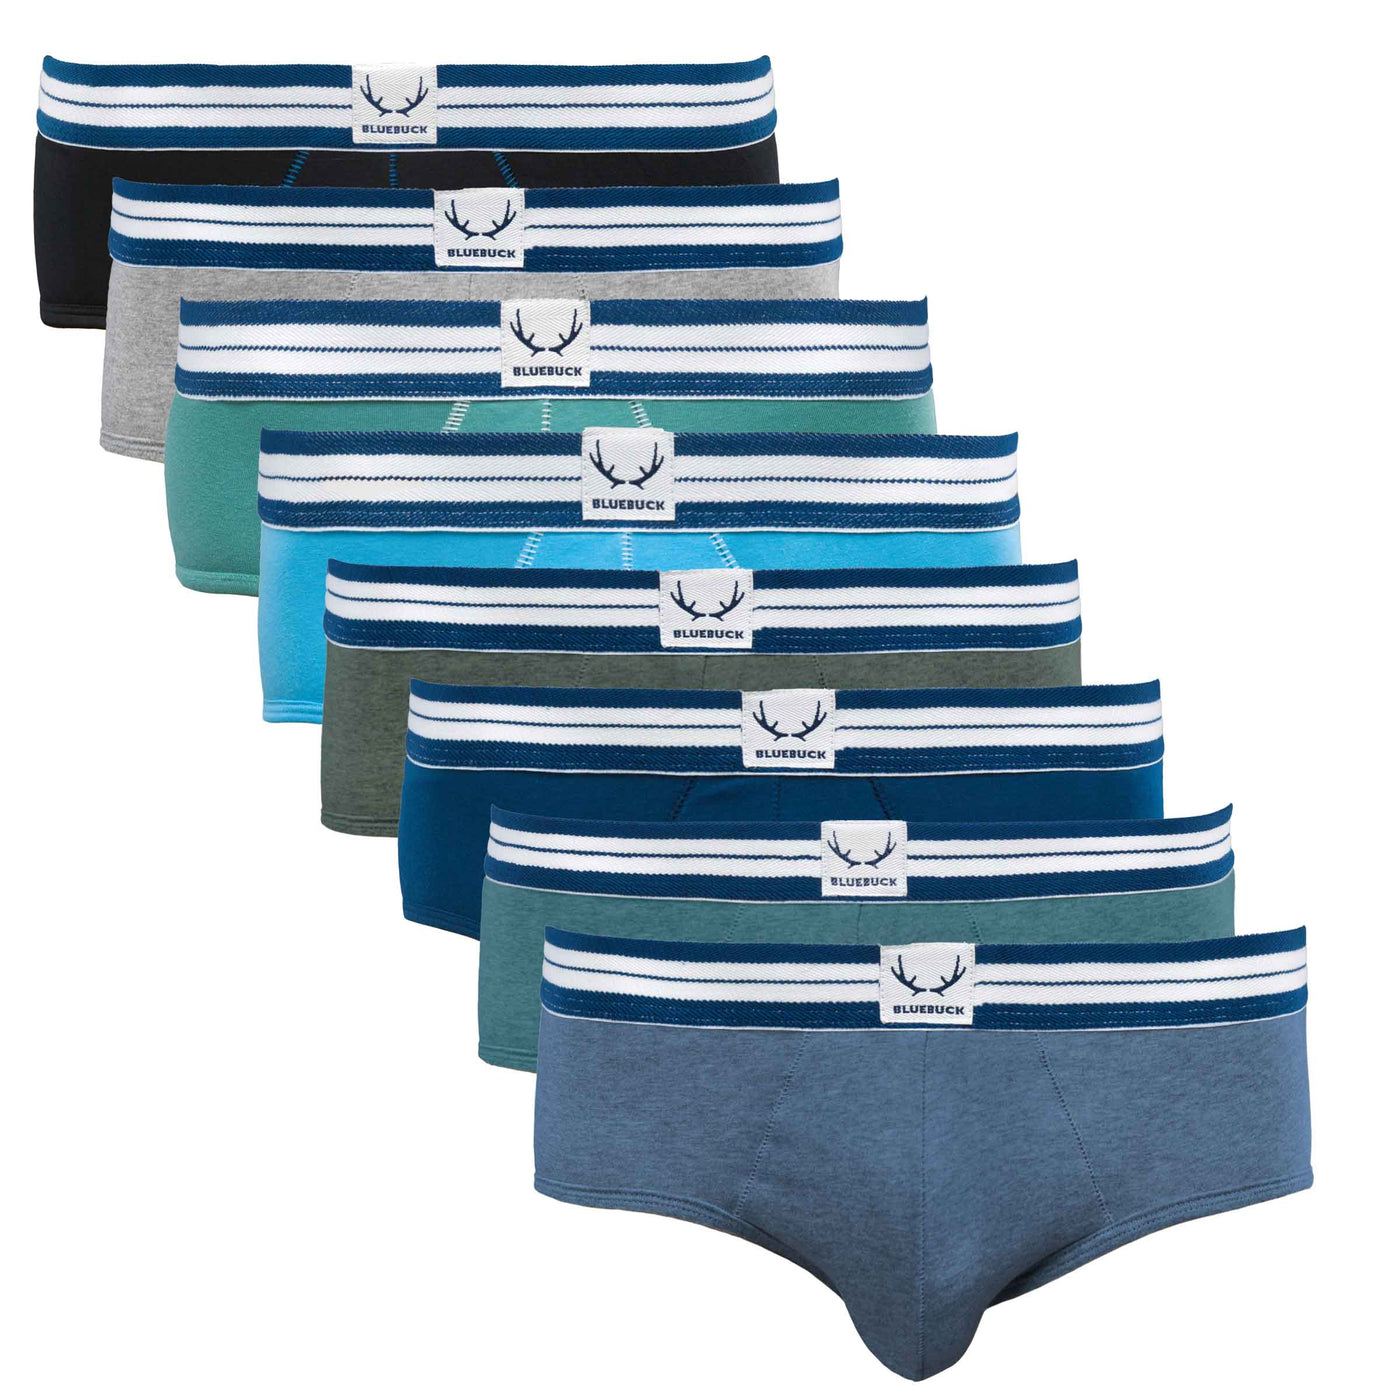 Pack of 8 classic briefs